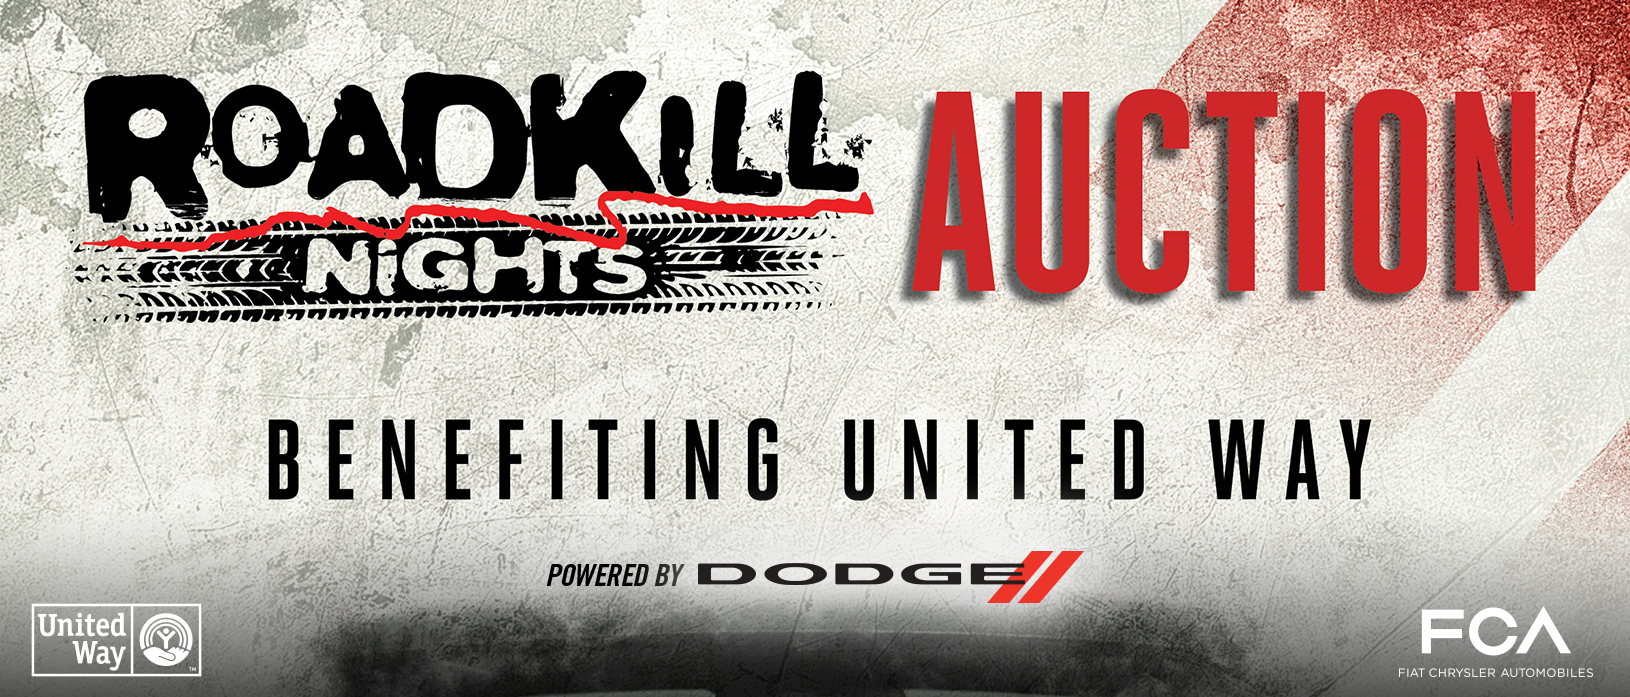 Roadkill Nights Powered by Dodge Auction to Benefit United Way for Southeastern Michigan